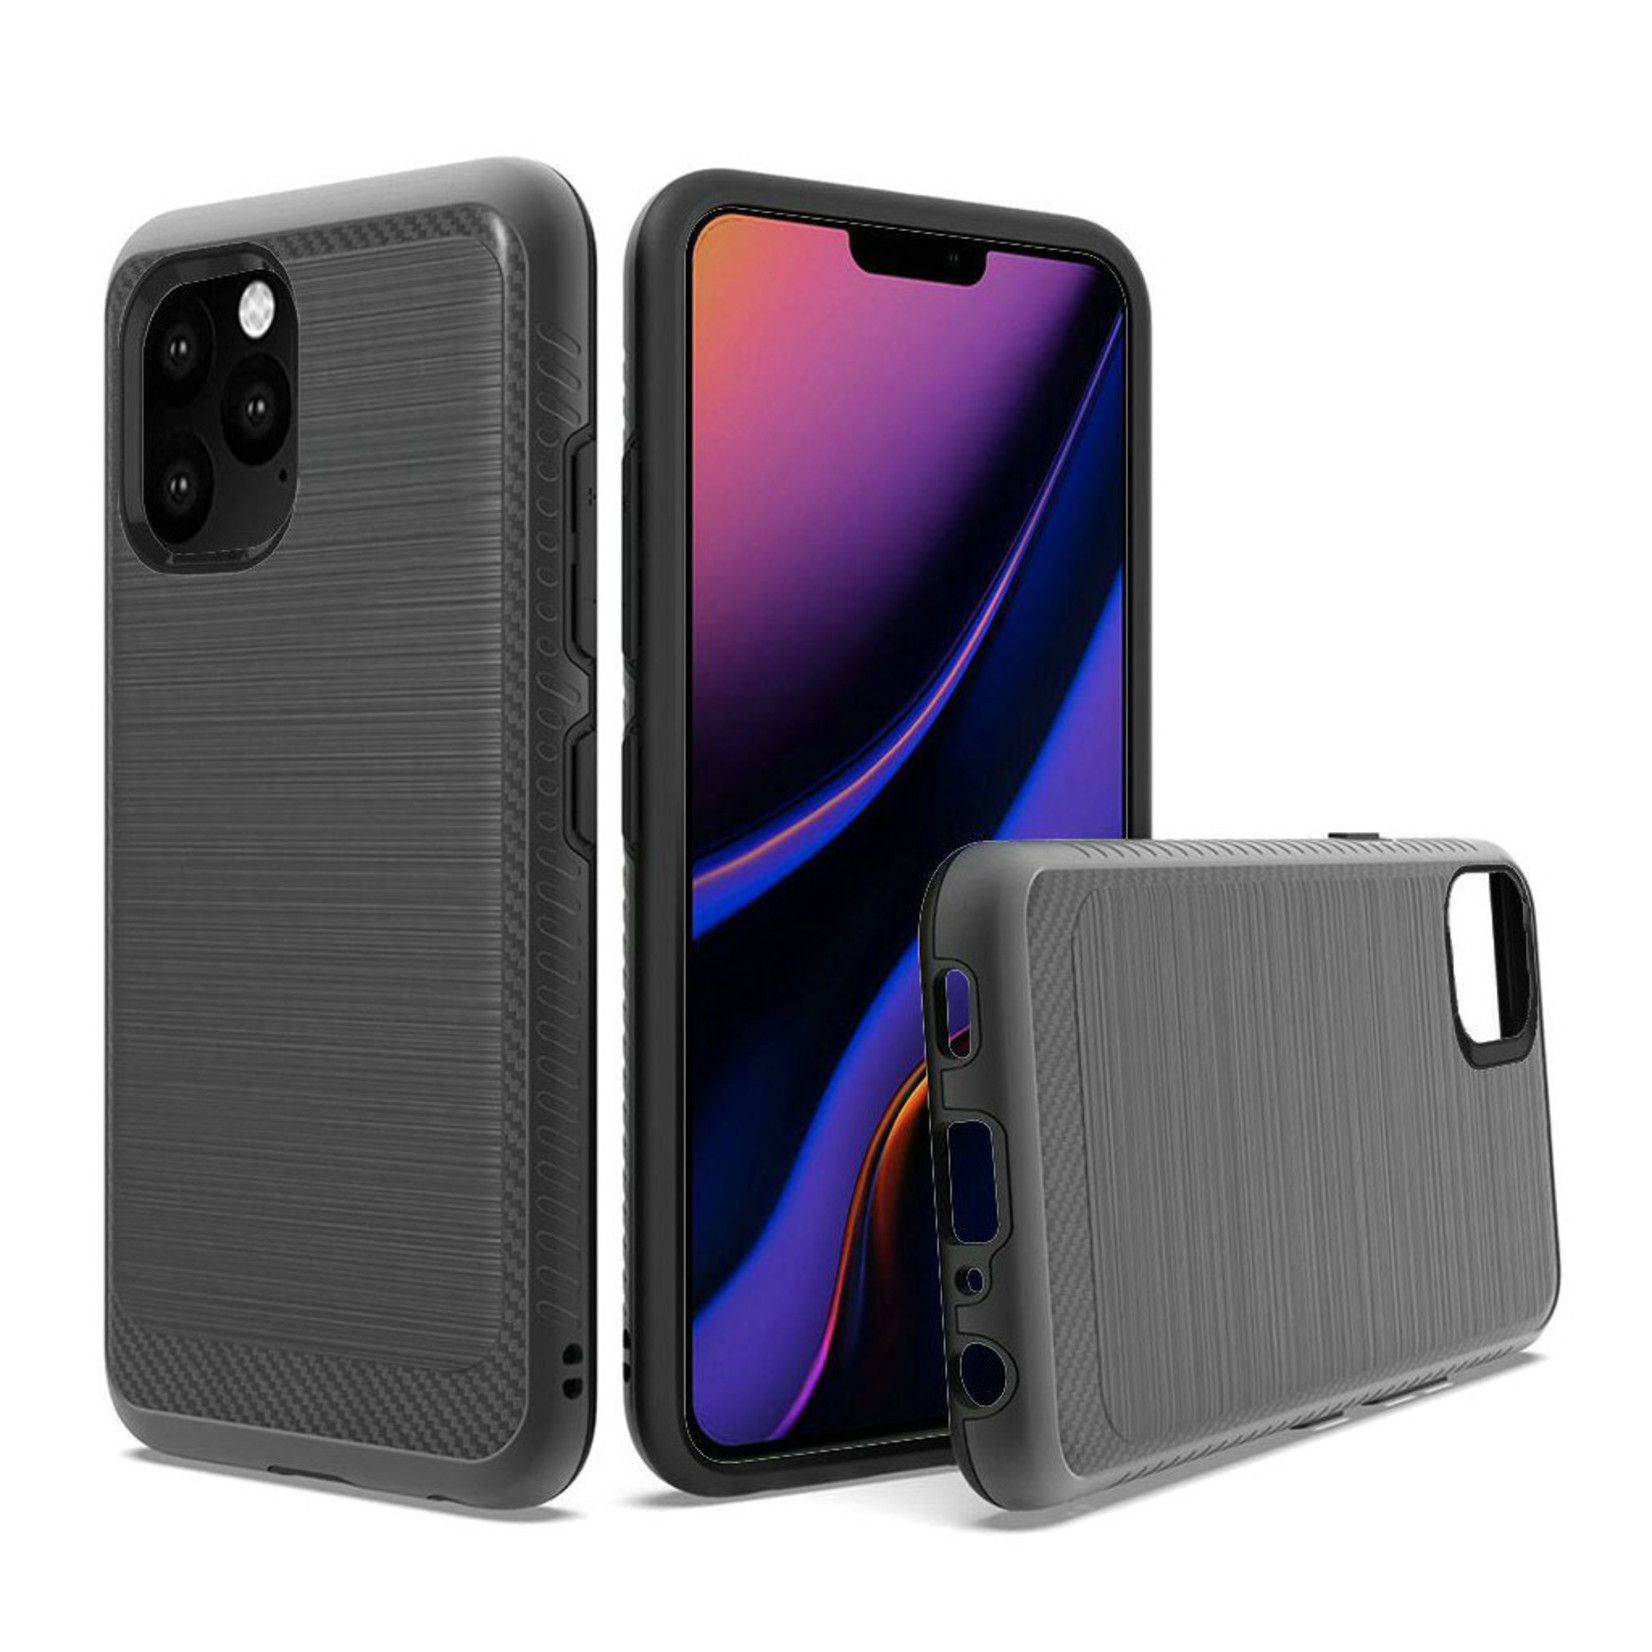 Metallic PC TPU Brushed Case with Carbon Fiber Edge for iPhone 11 Pro